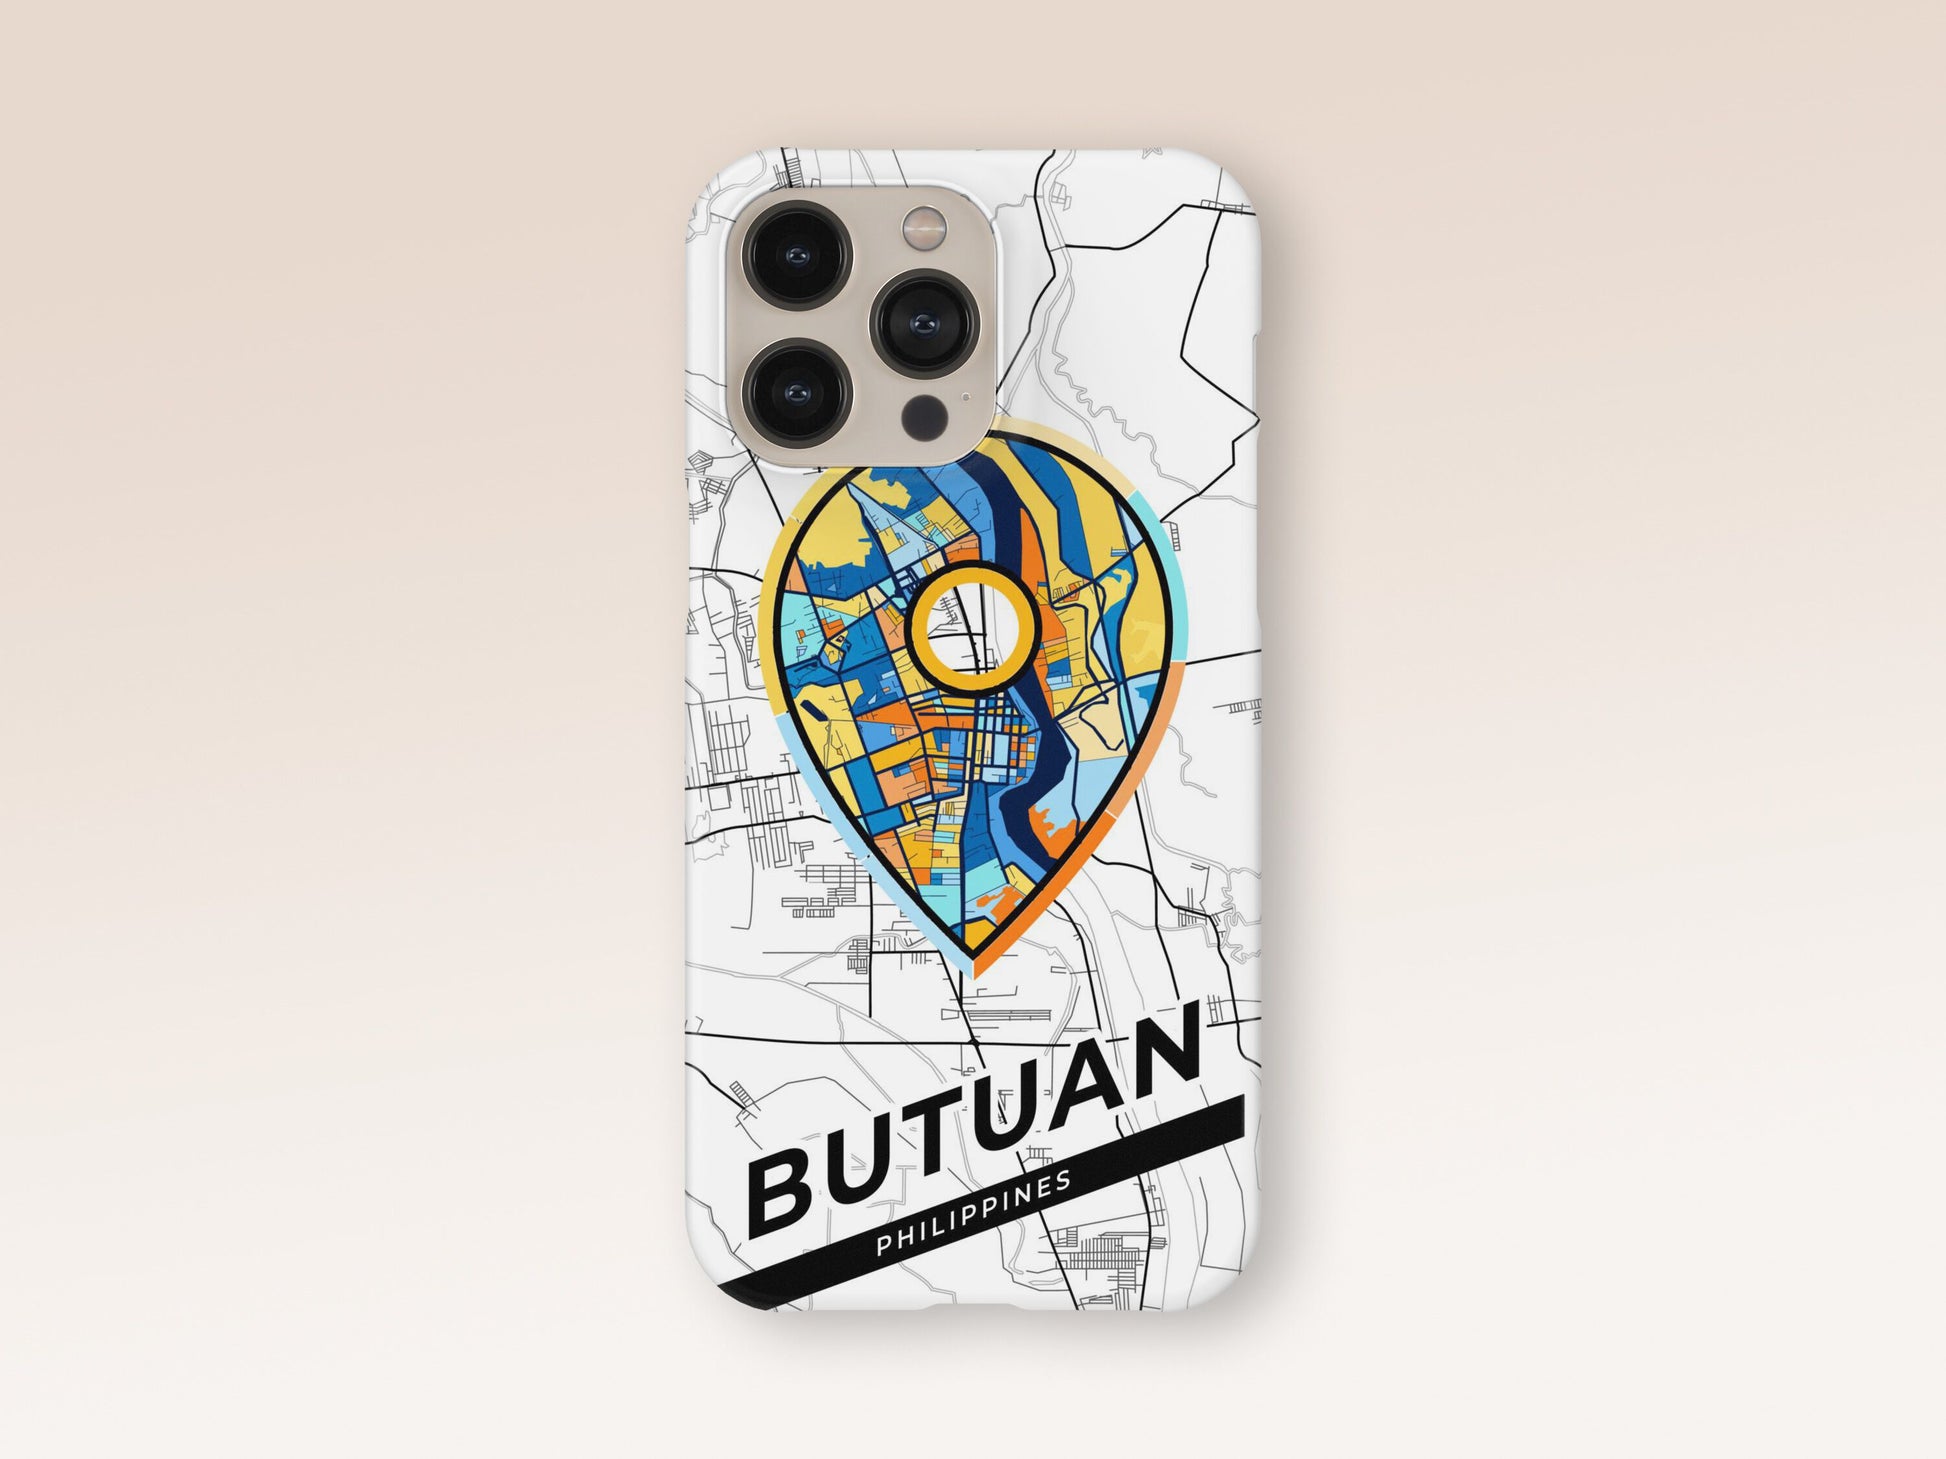 Butuan Philippines slim phone case with colorful icon. Birthday, wedding or housewarming gift. Couple match cases. 1